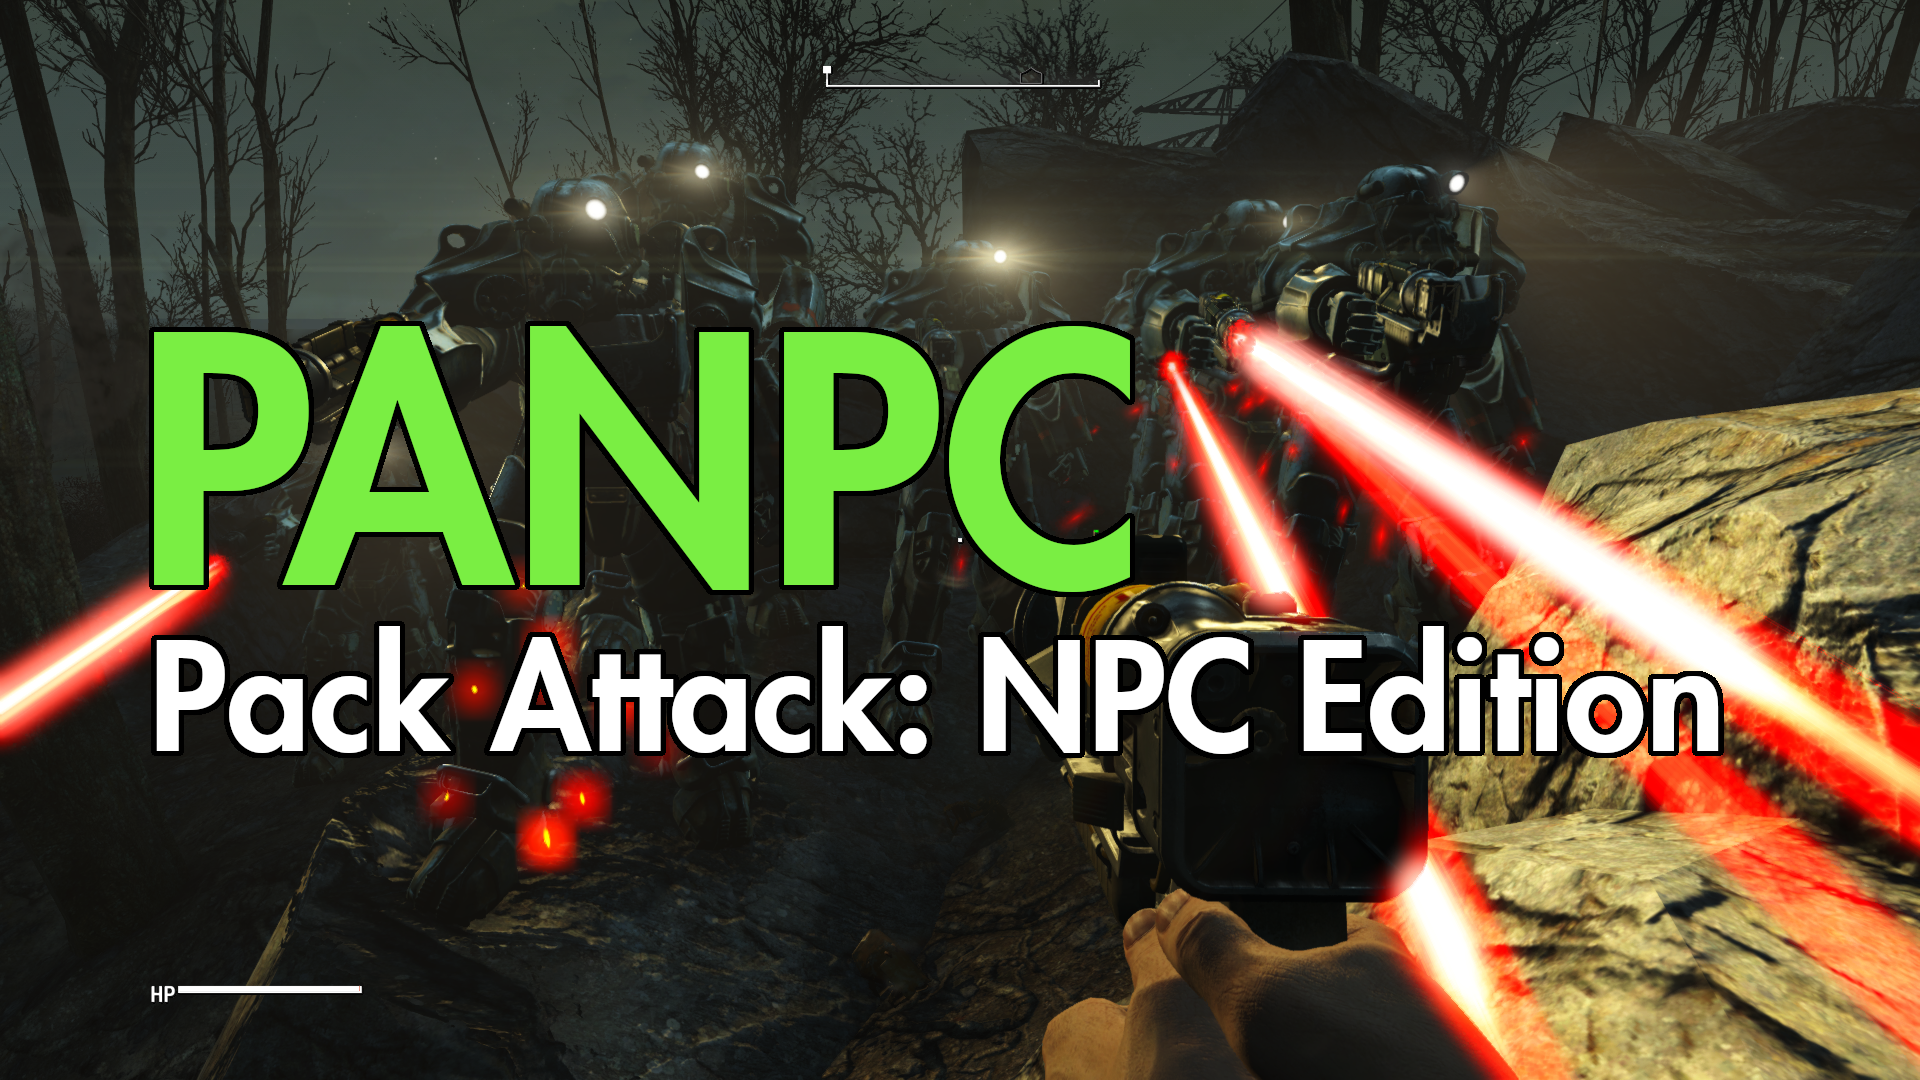 PANPC (Pack Attack NPC Edition) - Independent Fallout Wiki